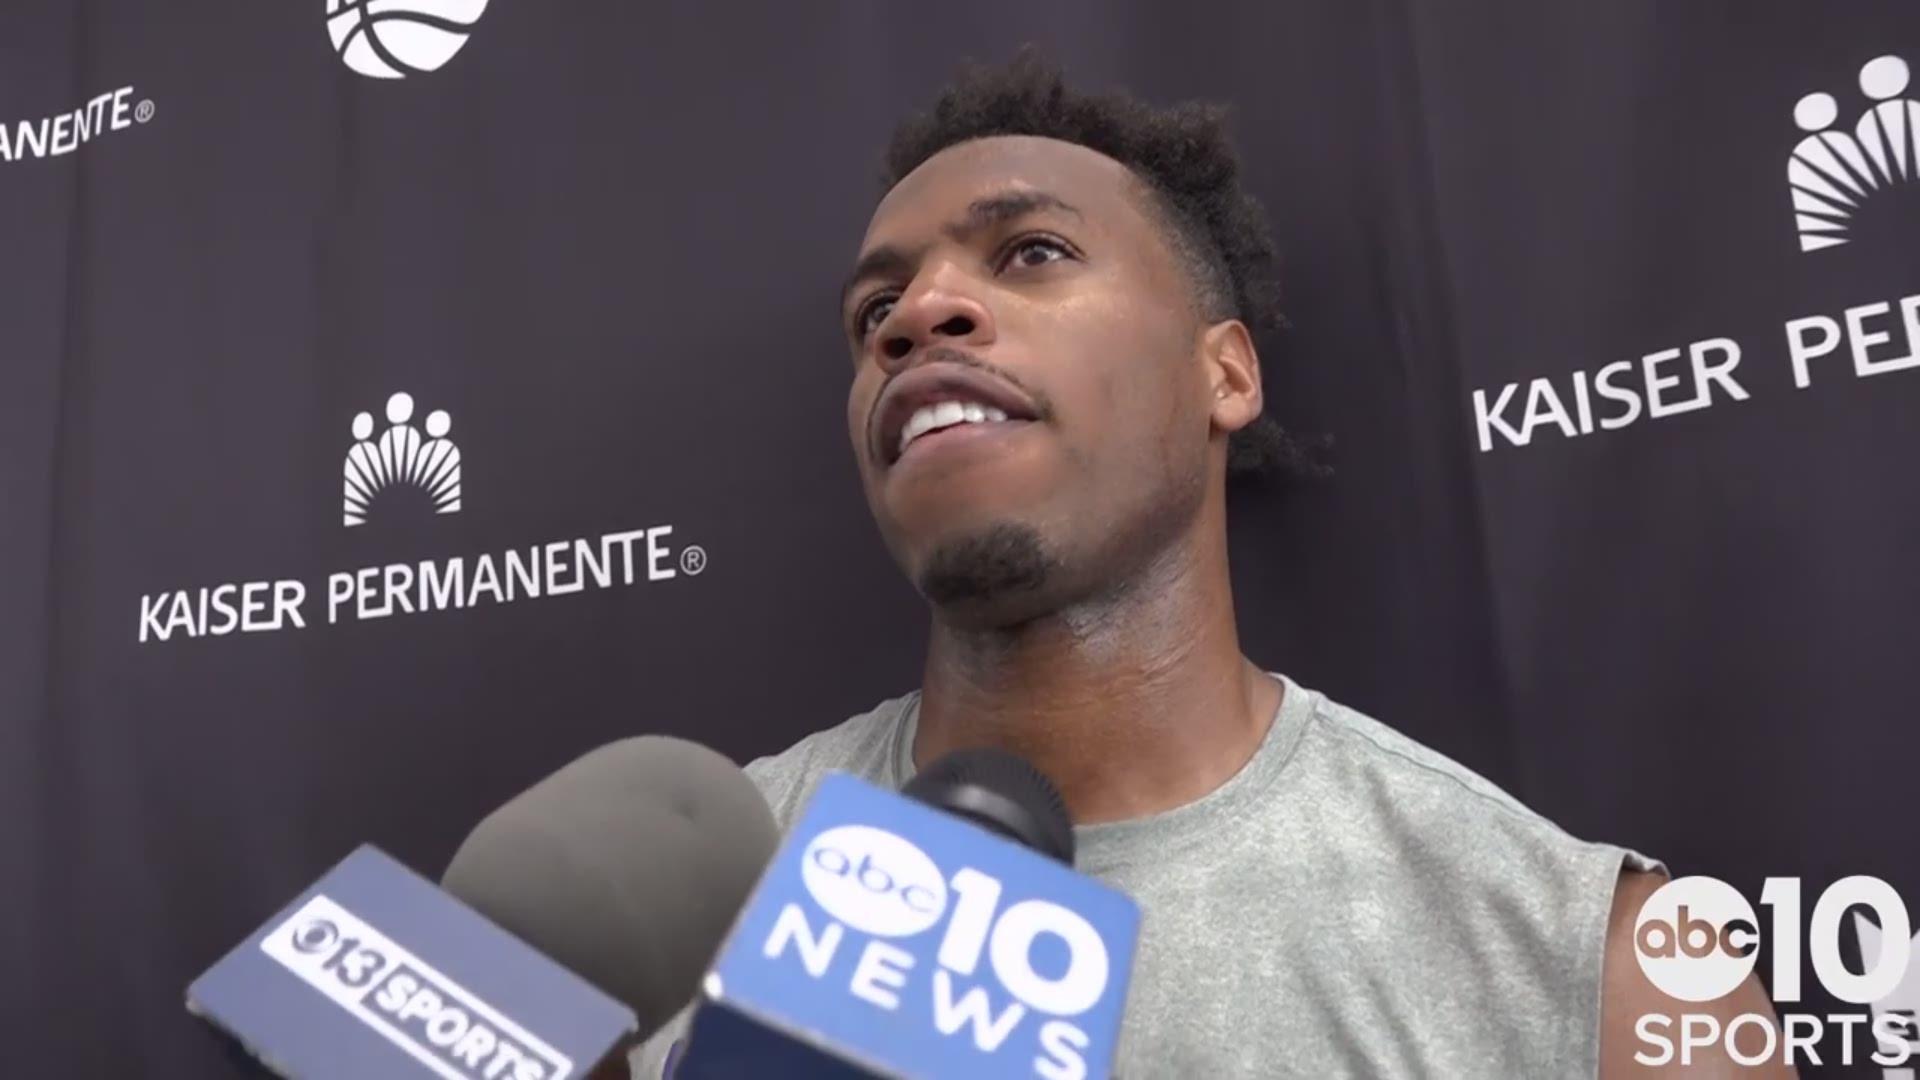 Sacramento Kings guard Buddy Hield talks about improvements needed as the third preseason game approaches, including the overall work ethic from the players.